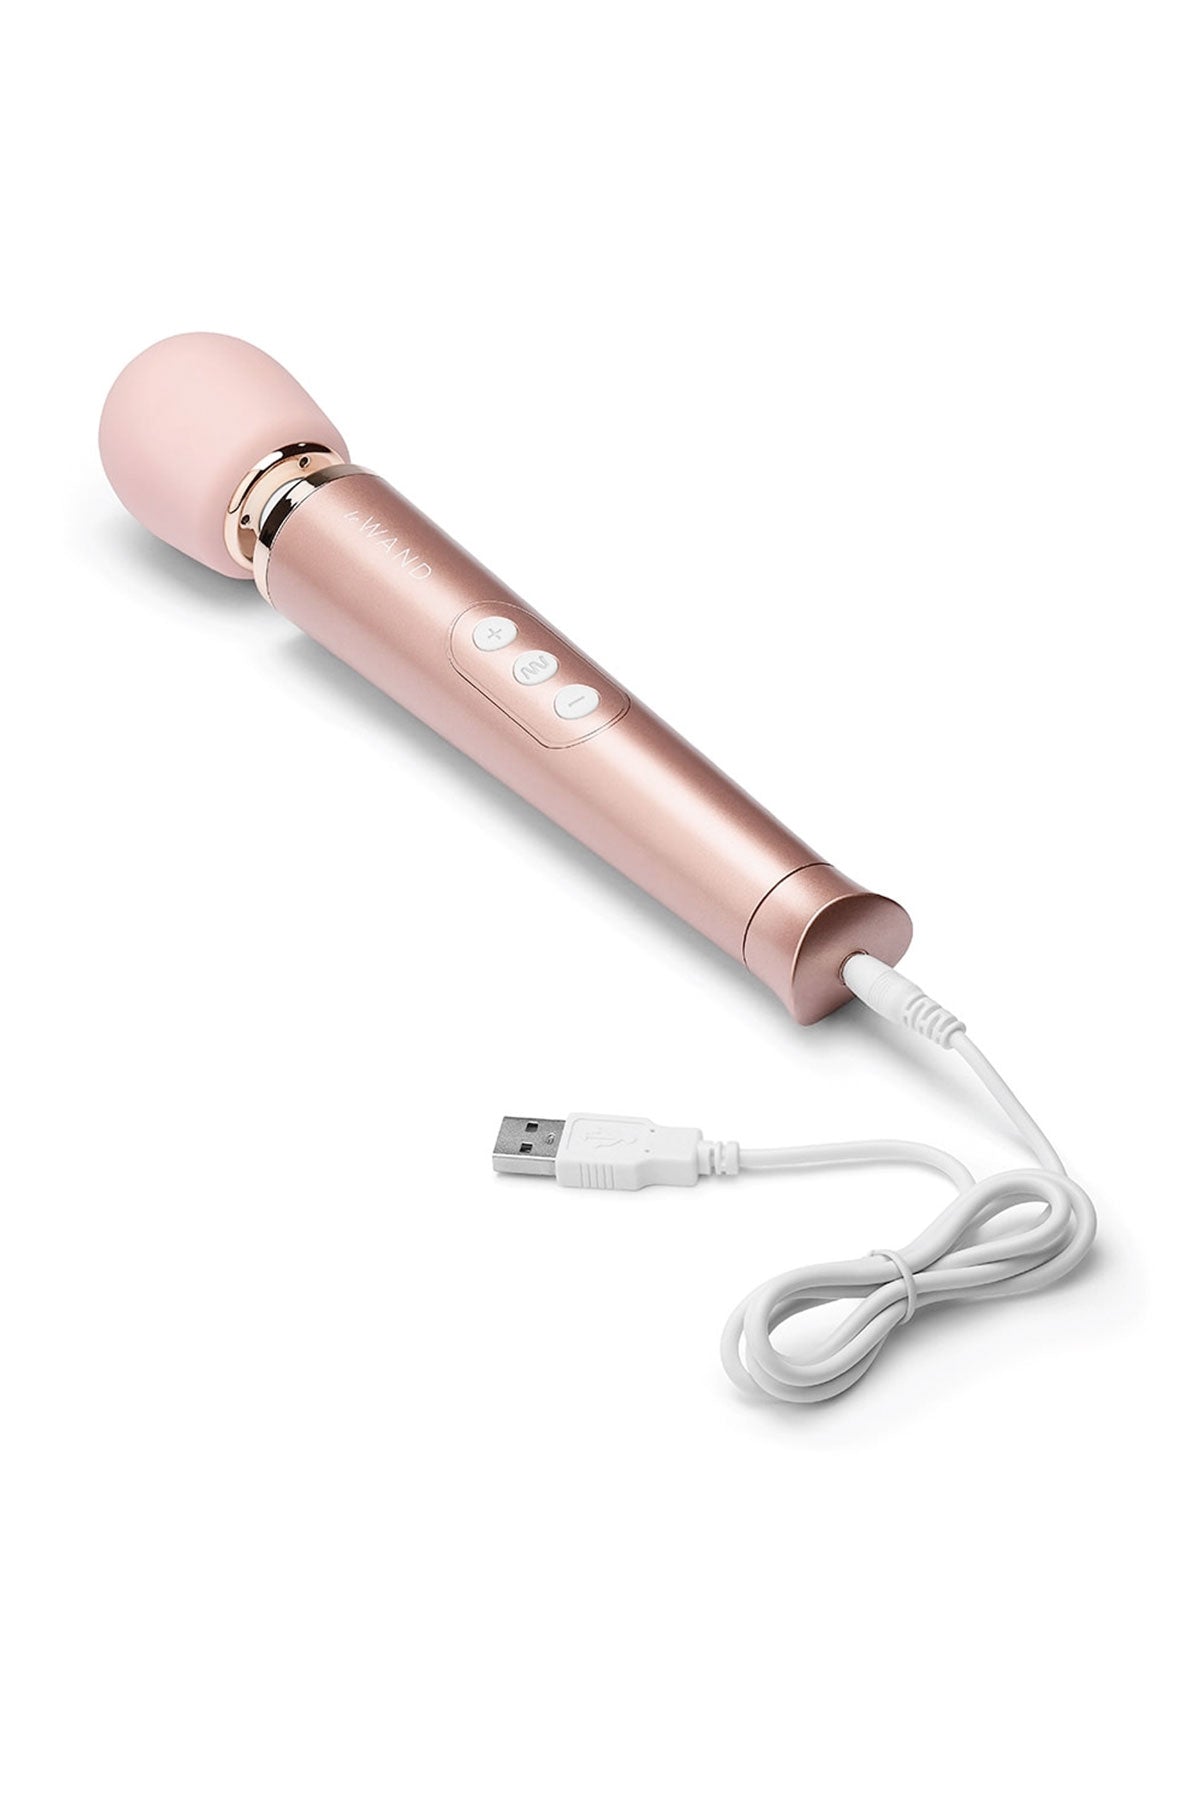 Le Wand Petite | Rechargeable Wand